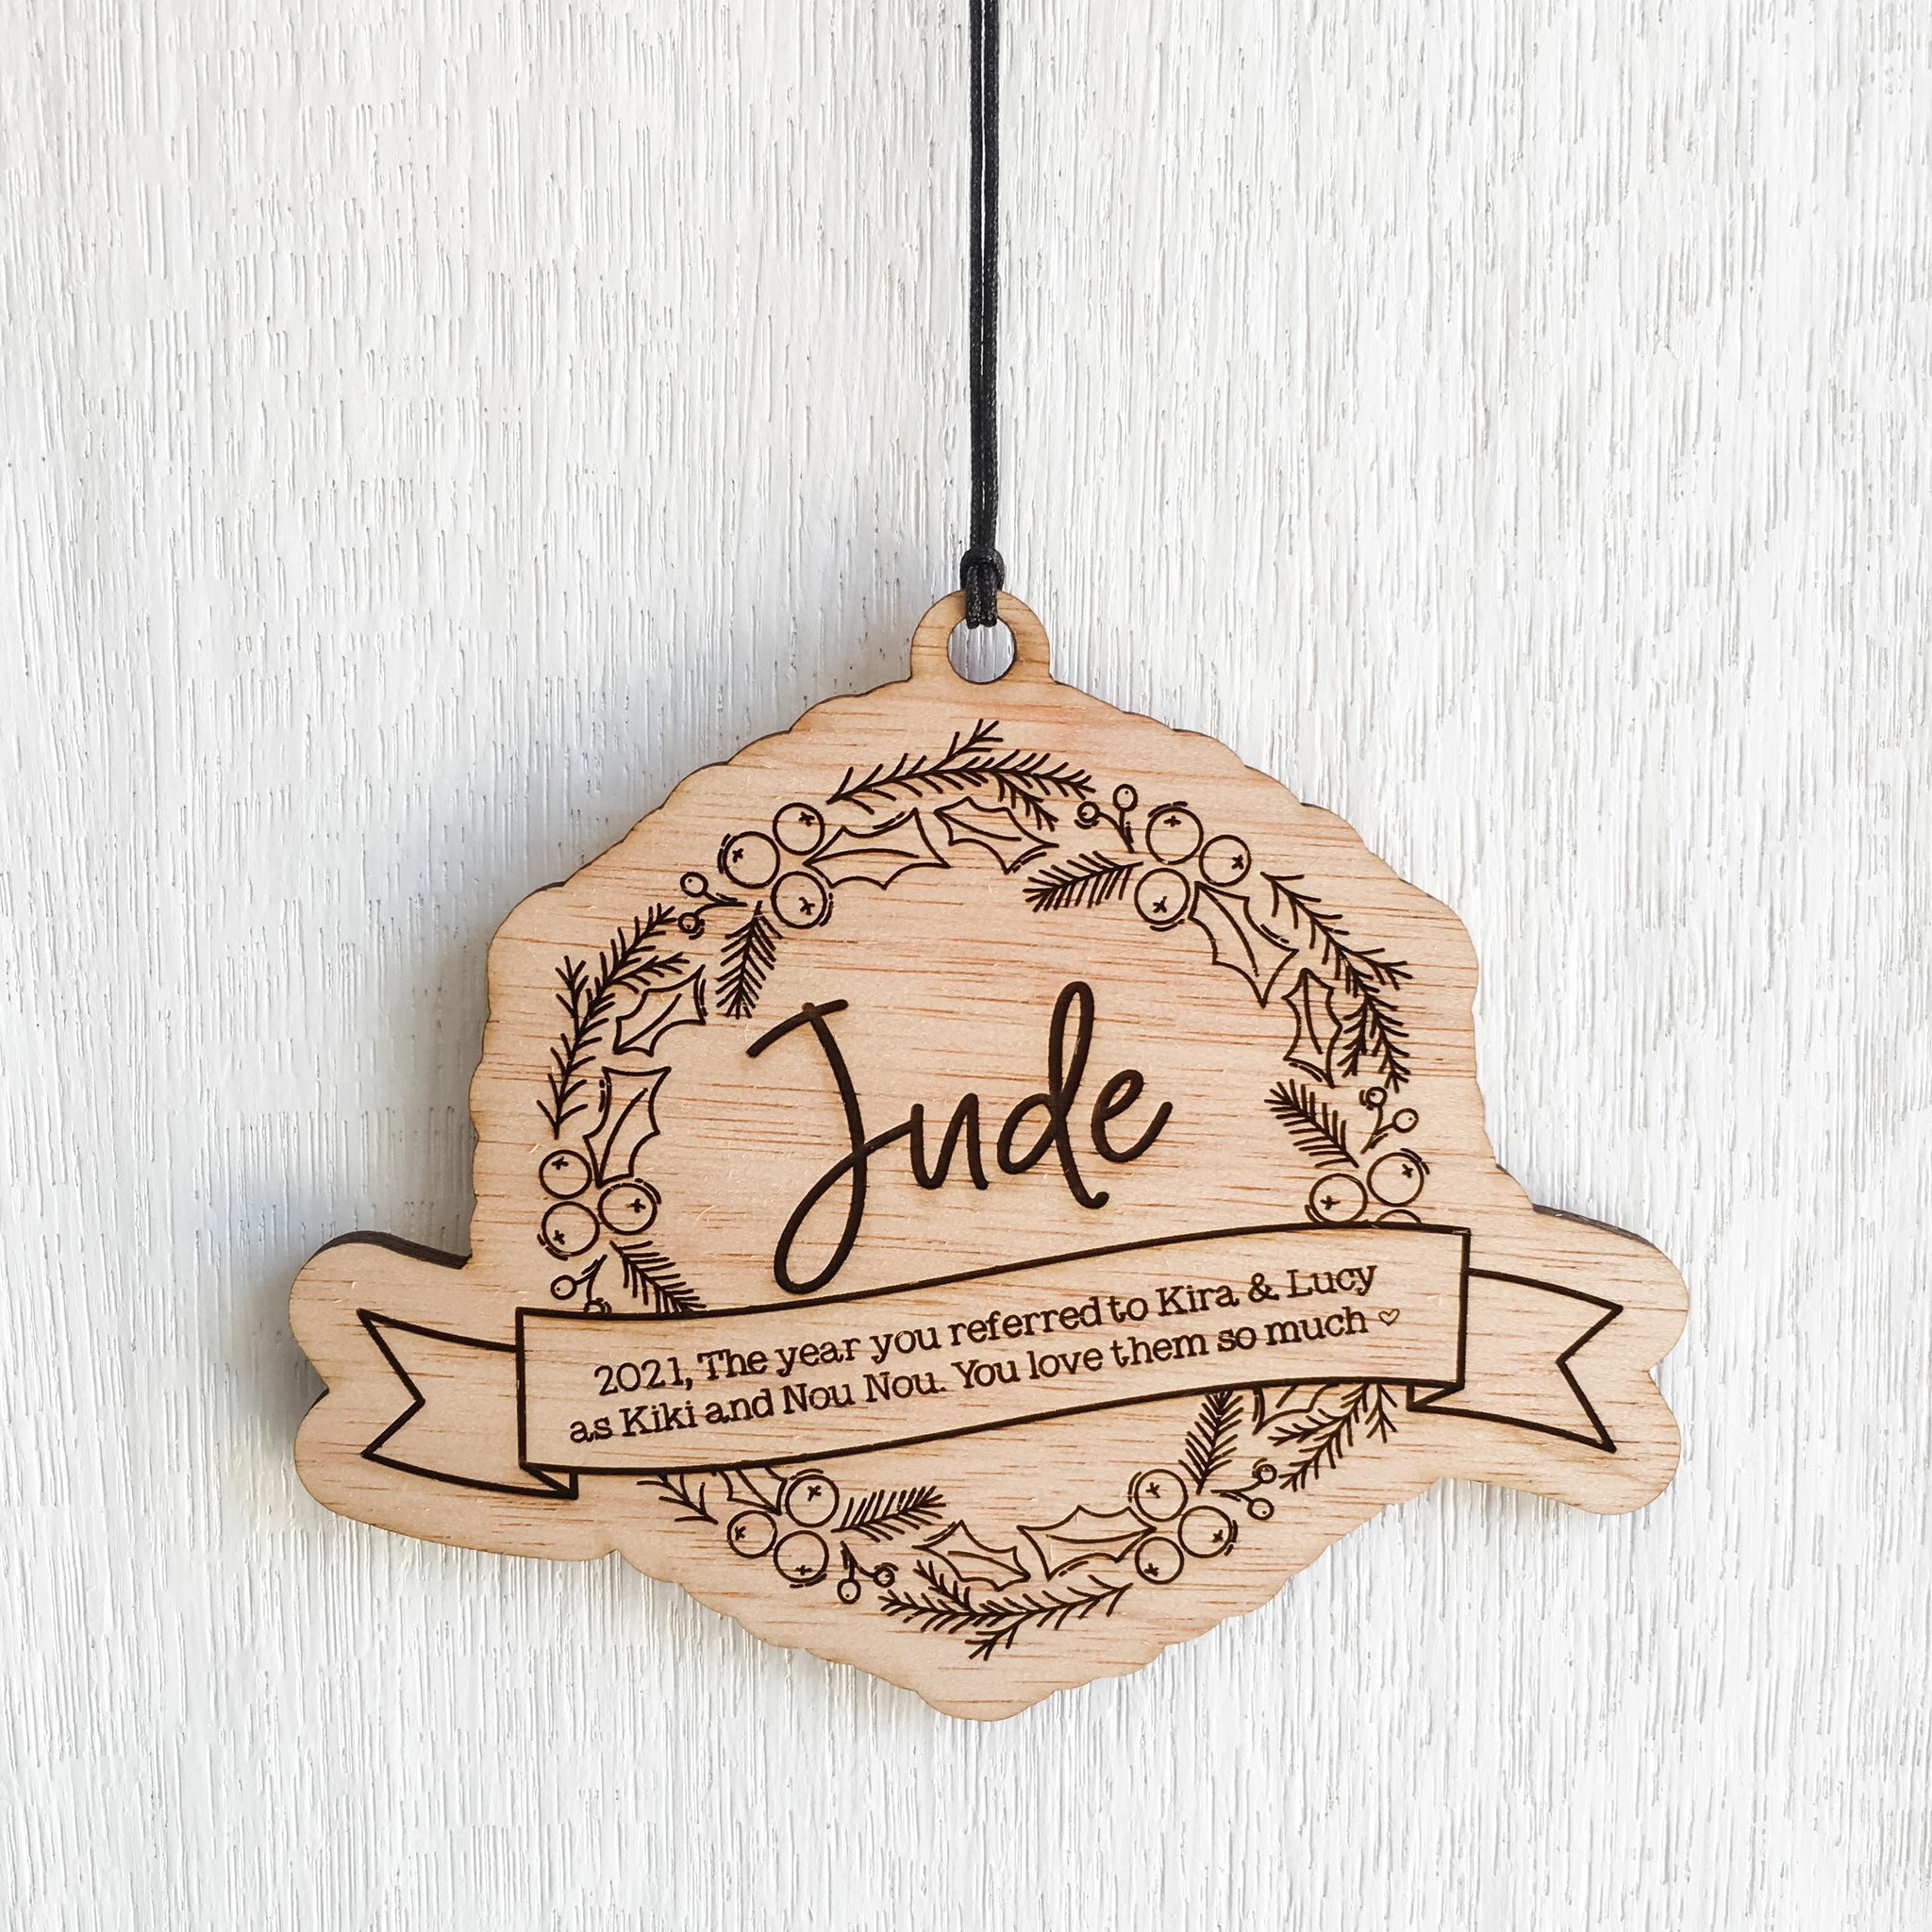 Personalised Christmas Decoration - (Annual Christmas Decoration) - A great way to remember a special moment from the year!